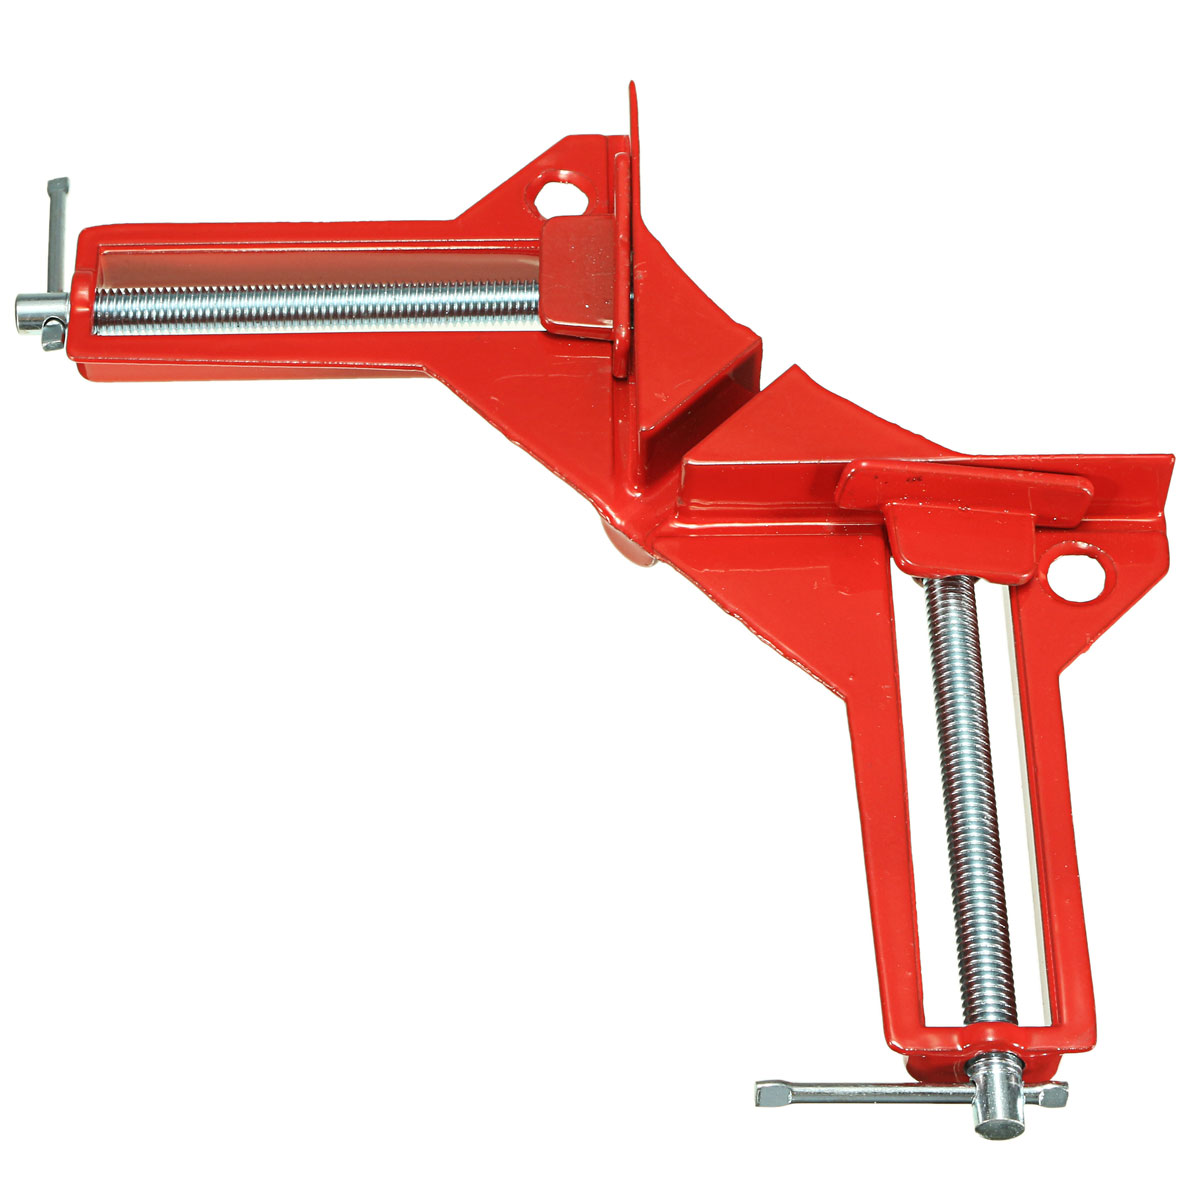 Raitooltrade-Multifunction-Right-Angle-Clip-90-Degree-Clamps-Corner-Holder-Wood-Working-Tool-1191136